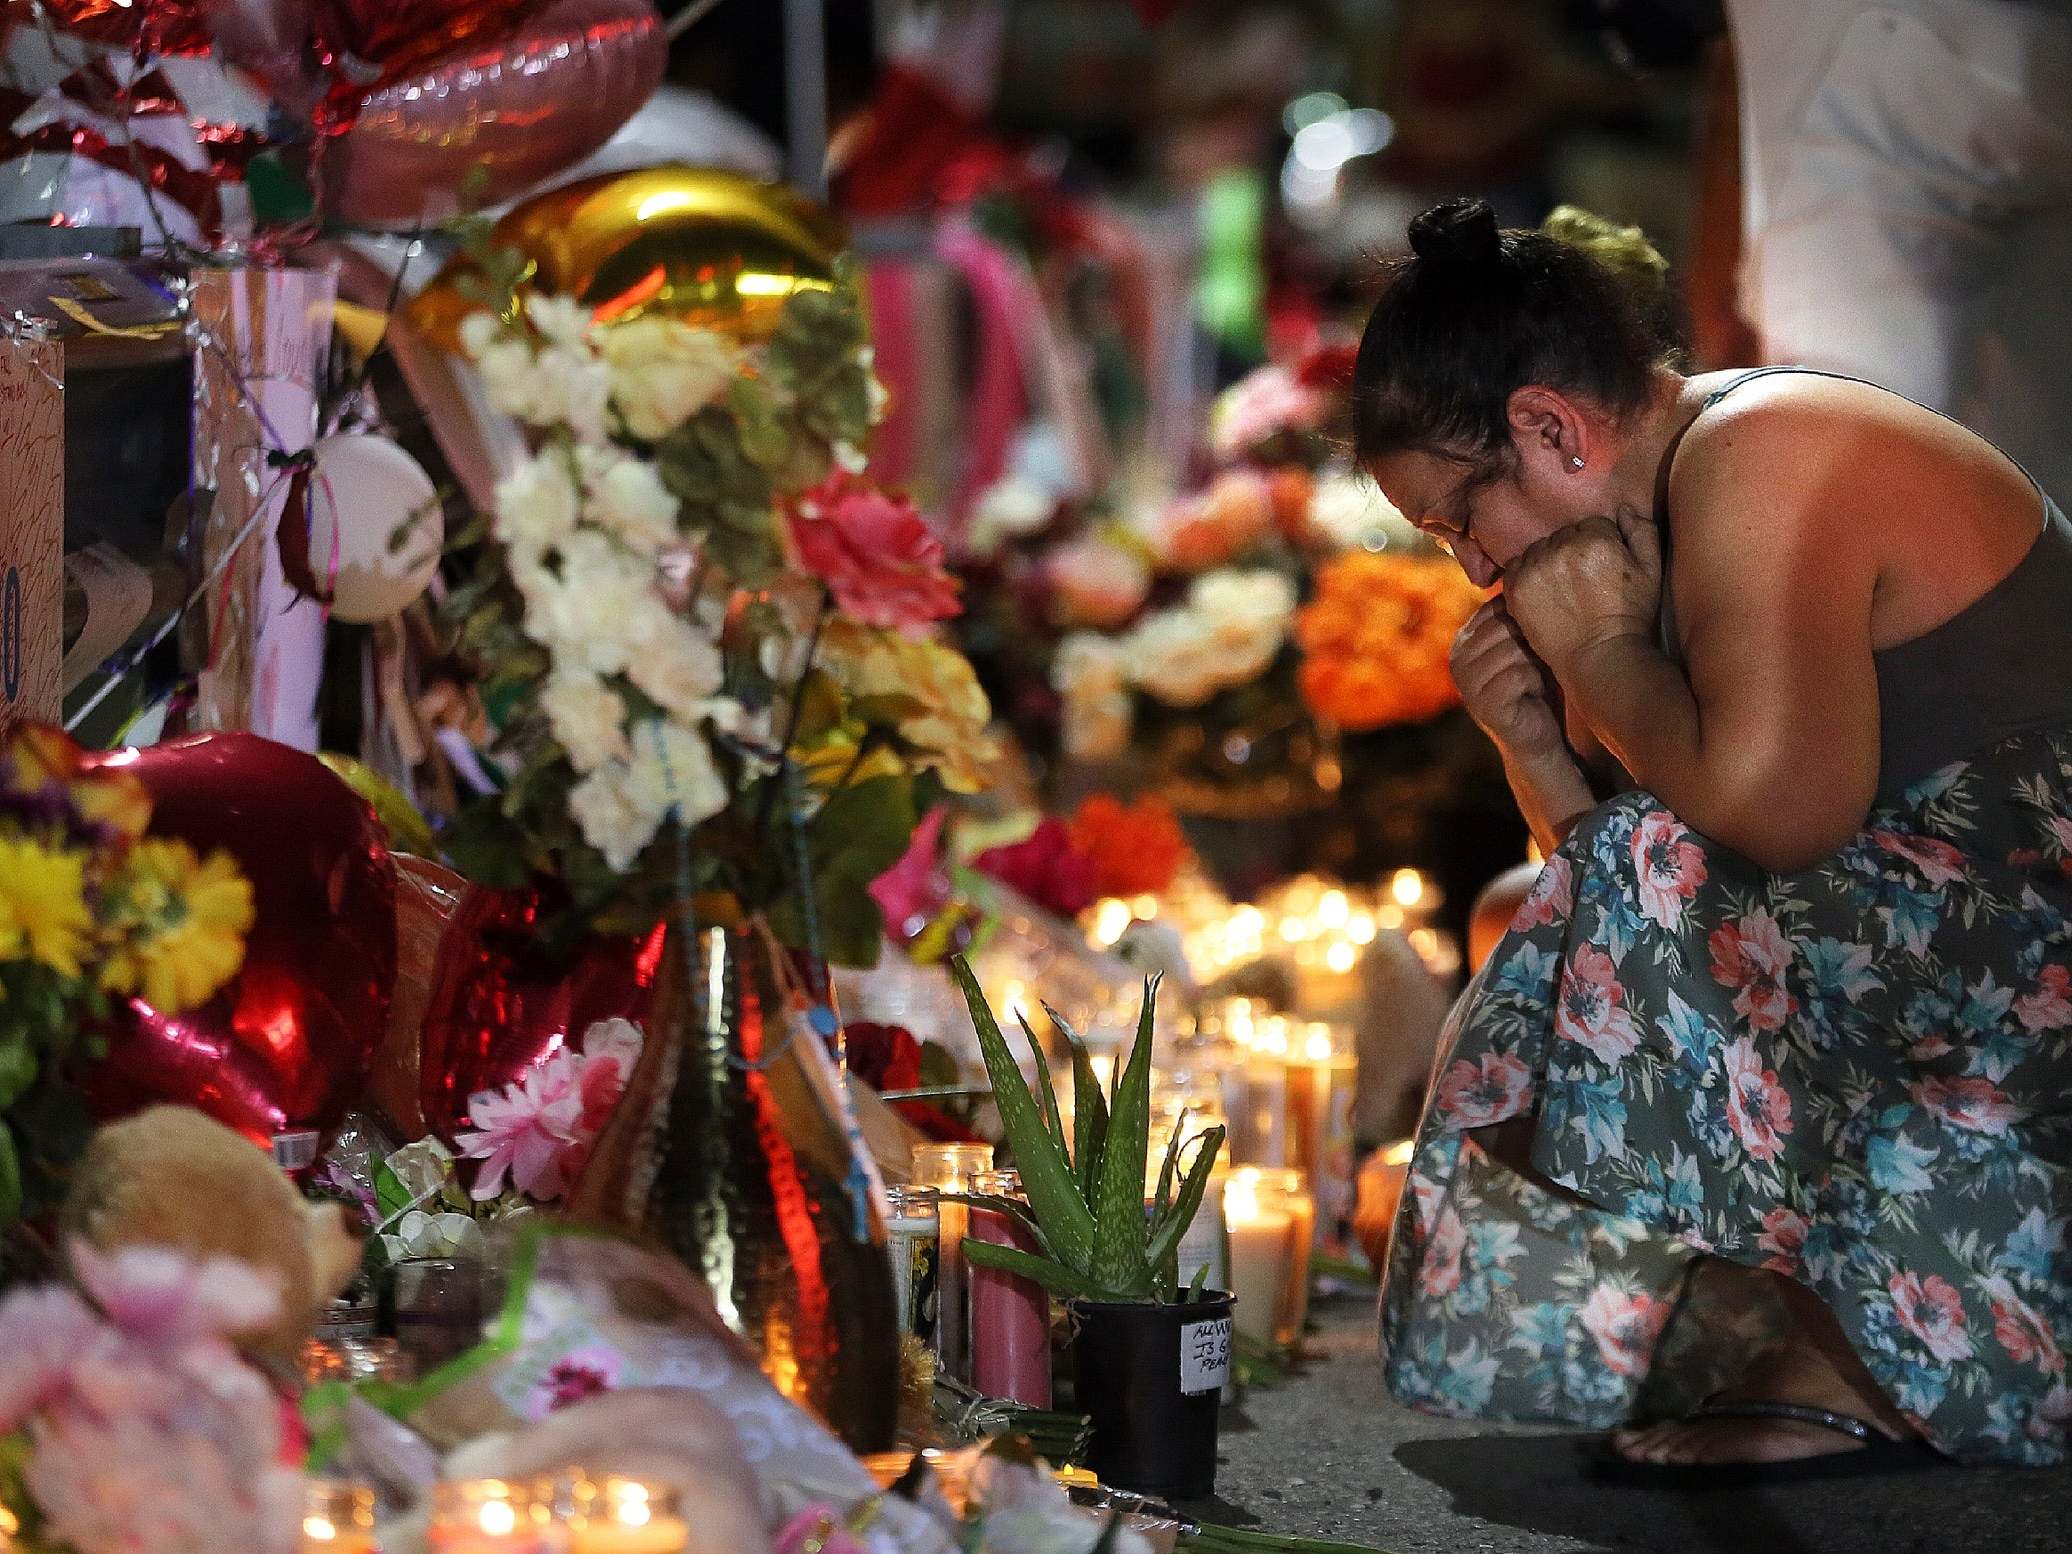 A visitor joins a vigil outside the Walmart in El Paso to pay their respects to those who lost their lives in Saturday's attack